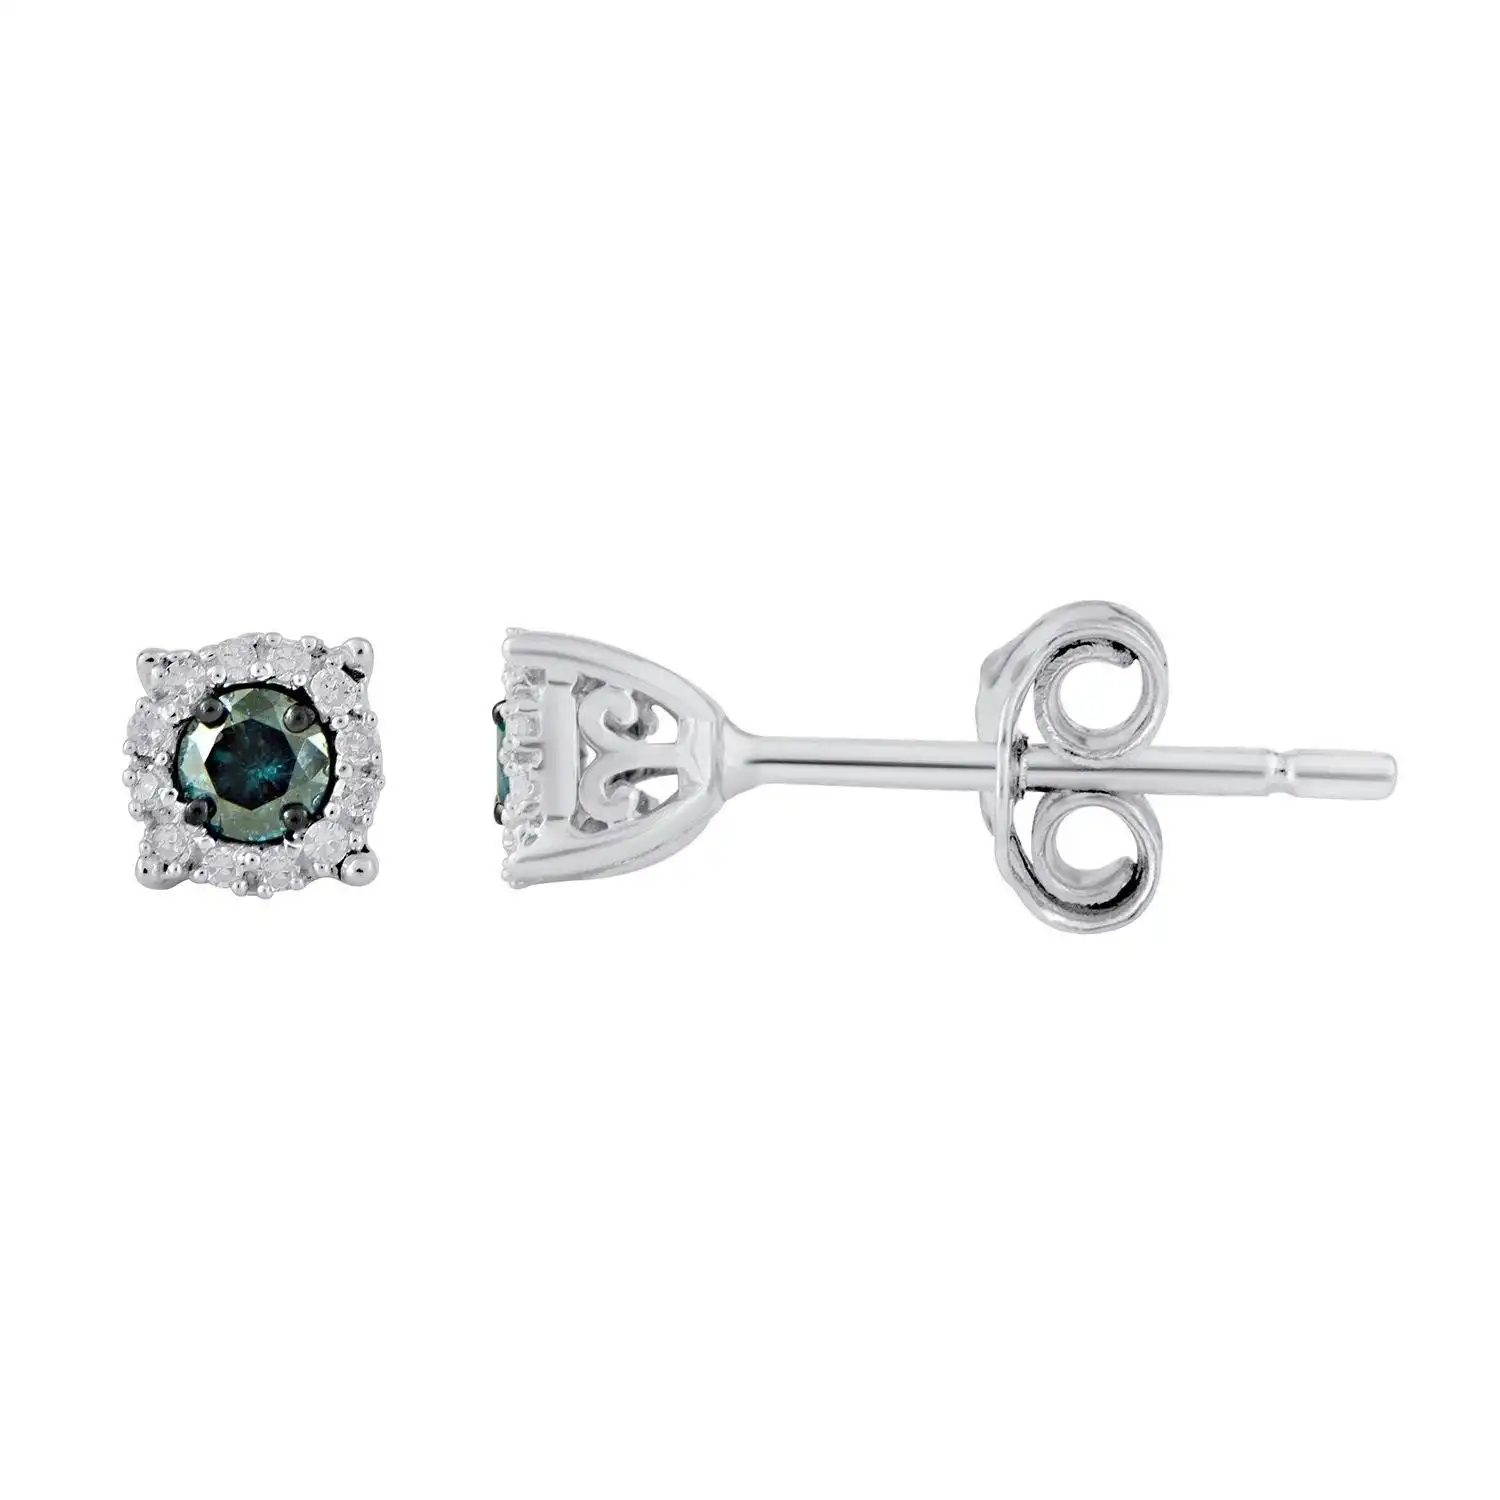 Halo Stud Earrings with 1/4ct of Diamonds in Sterling Silver